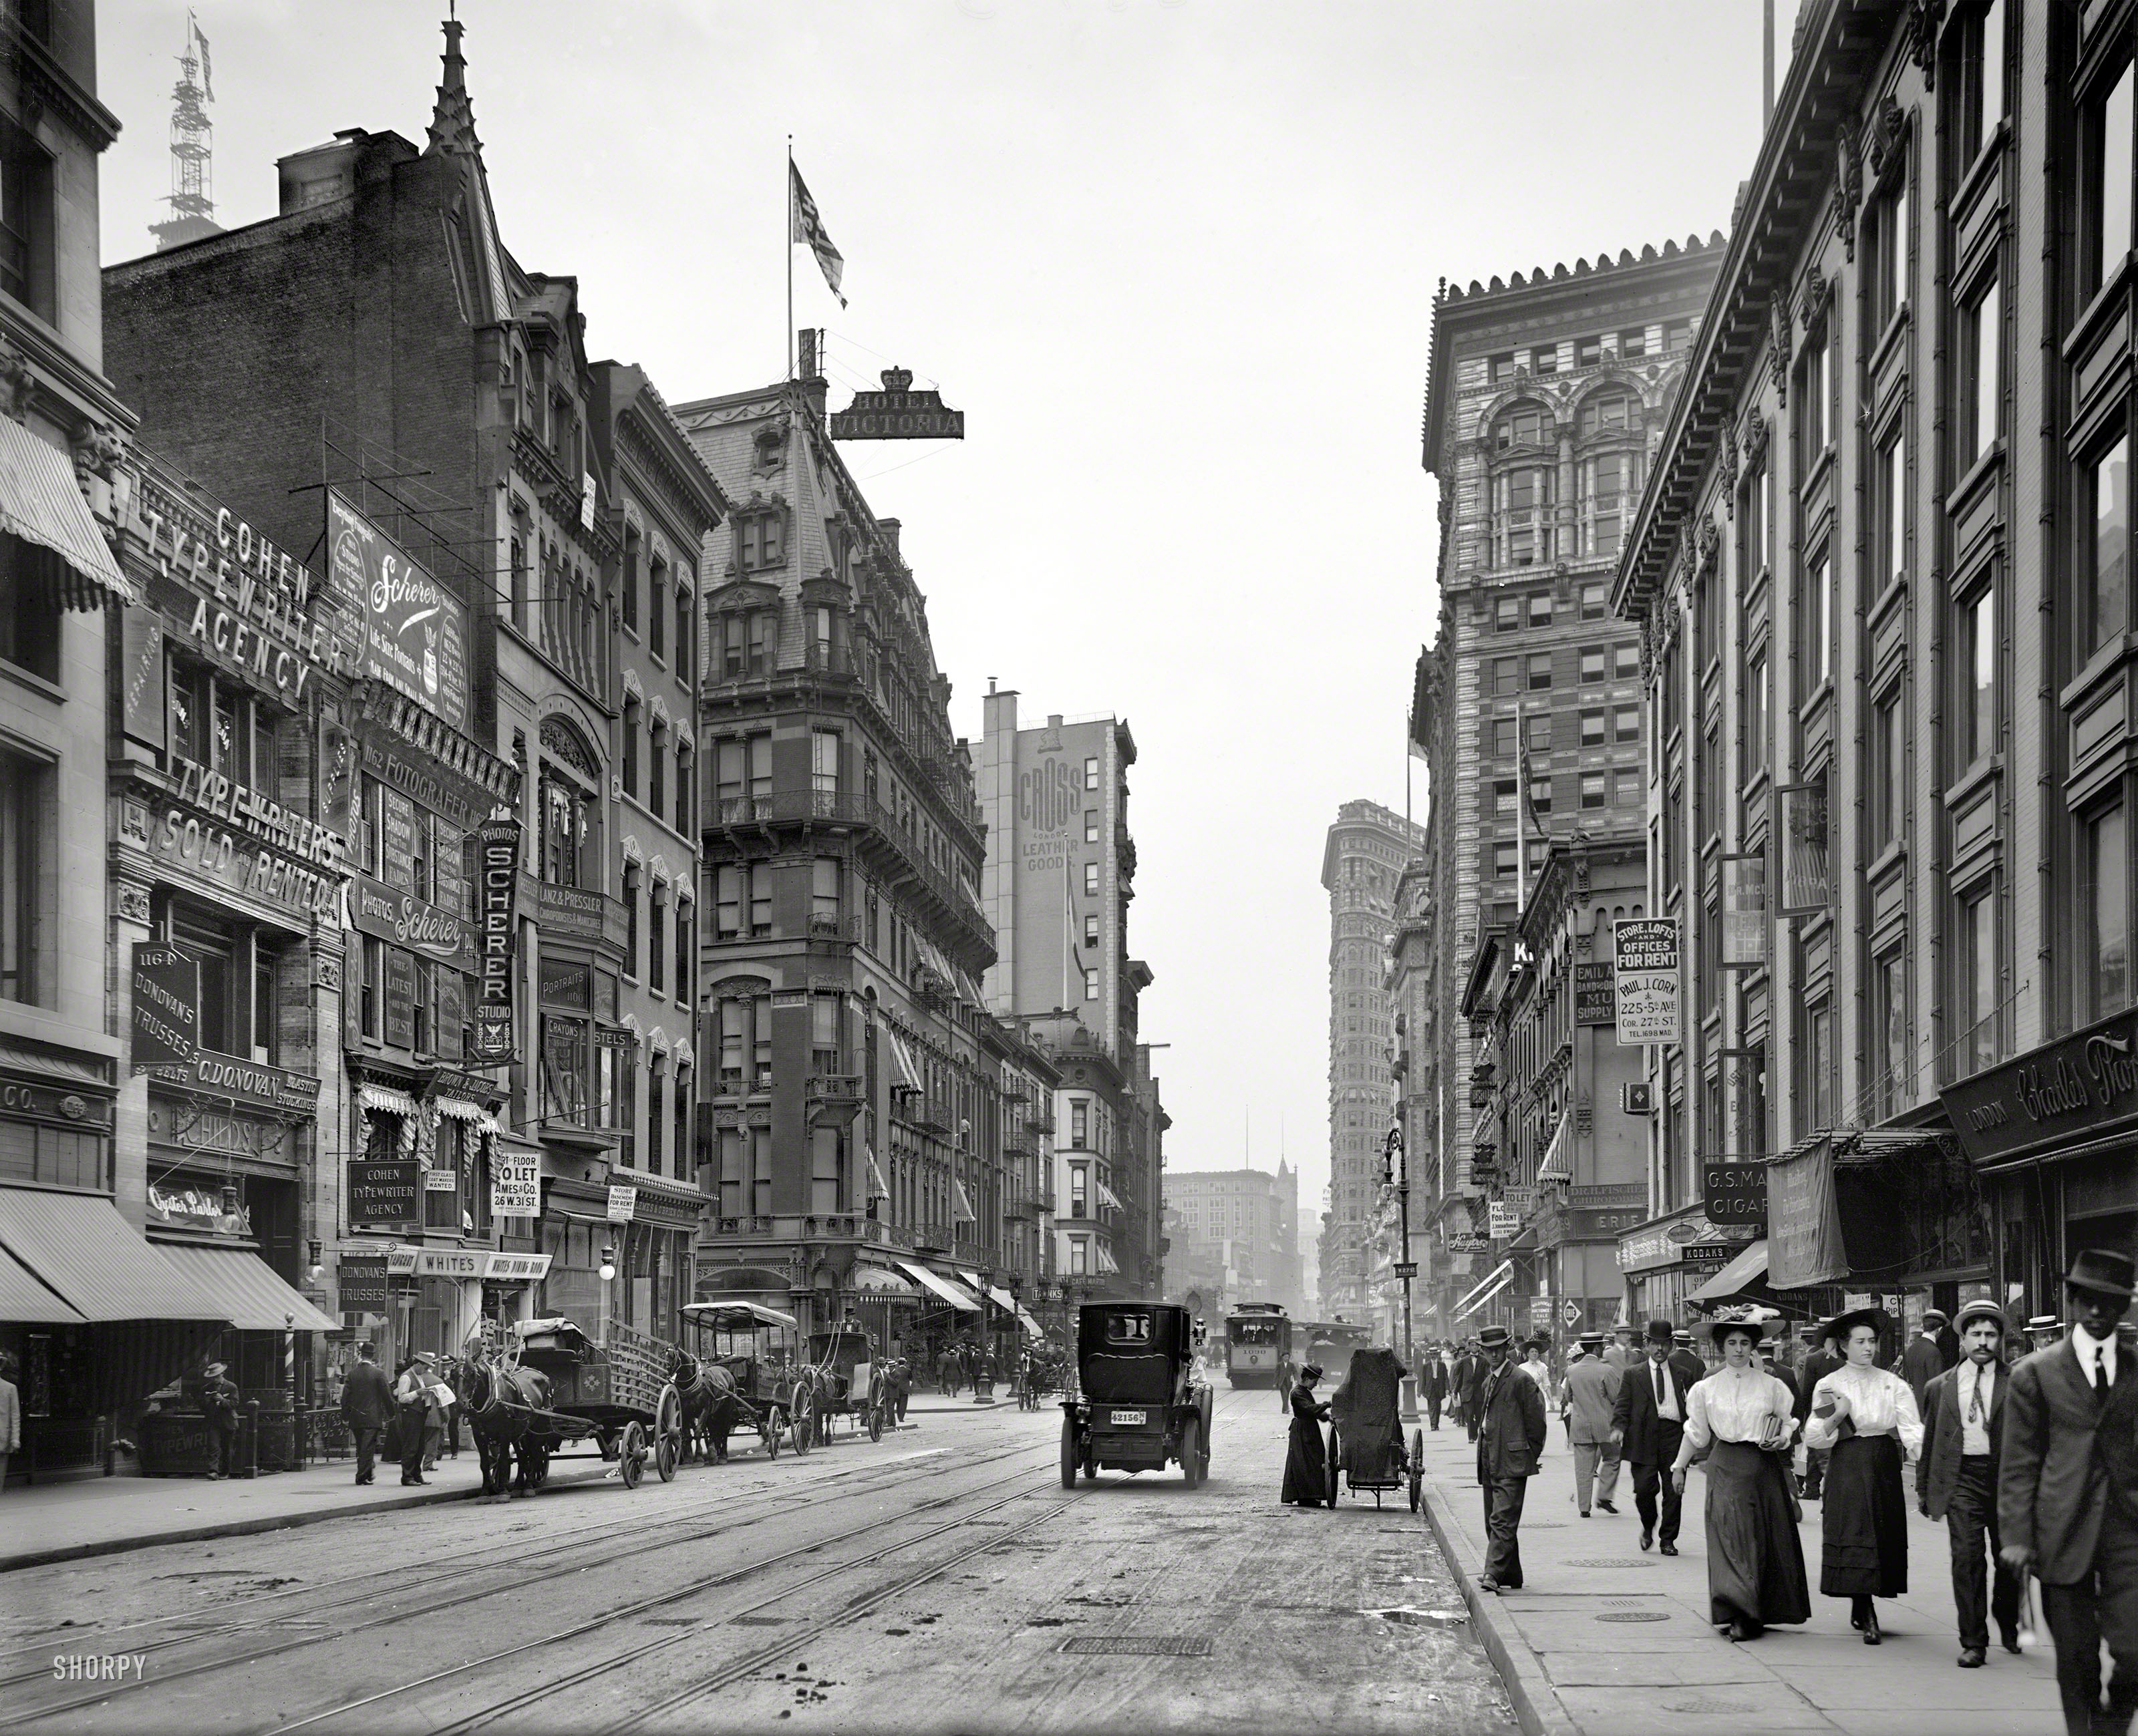 New York circa 1910. "Broadway and Hotel Victoria." With the Flatiron Building looming in the distance. 8x10 glass negative. View full size.